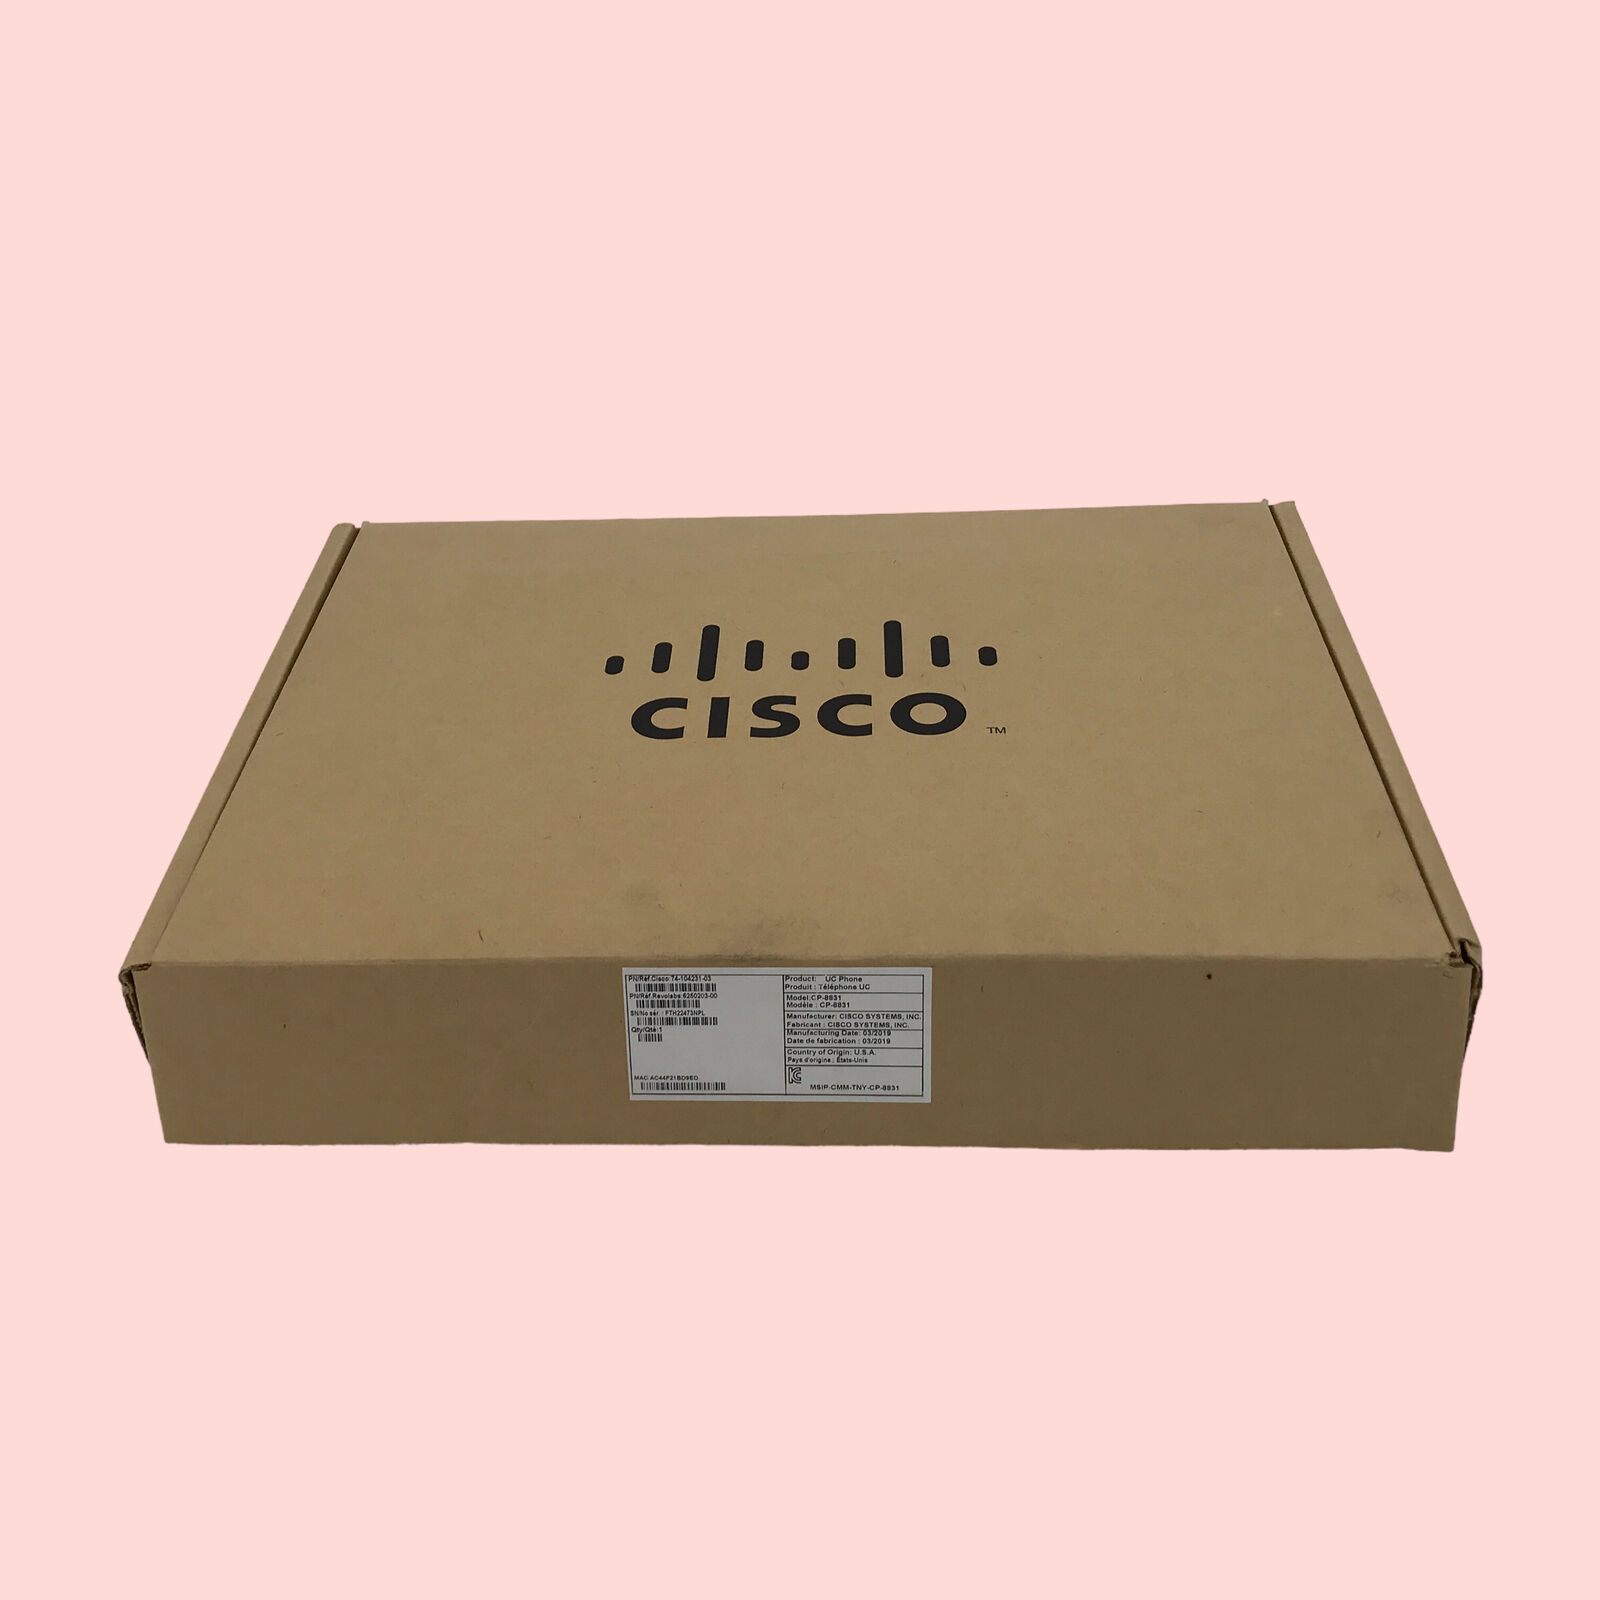 Cisco Unified 8831 IP Wireless Conference Station CP-8831 UC Phone #3005